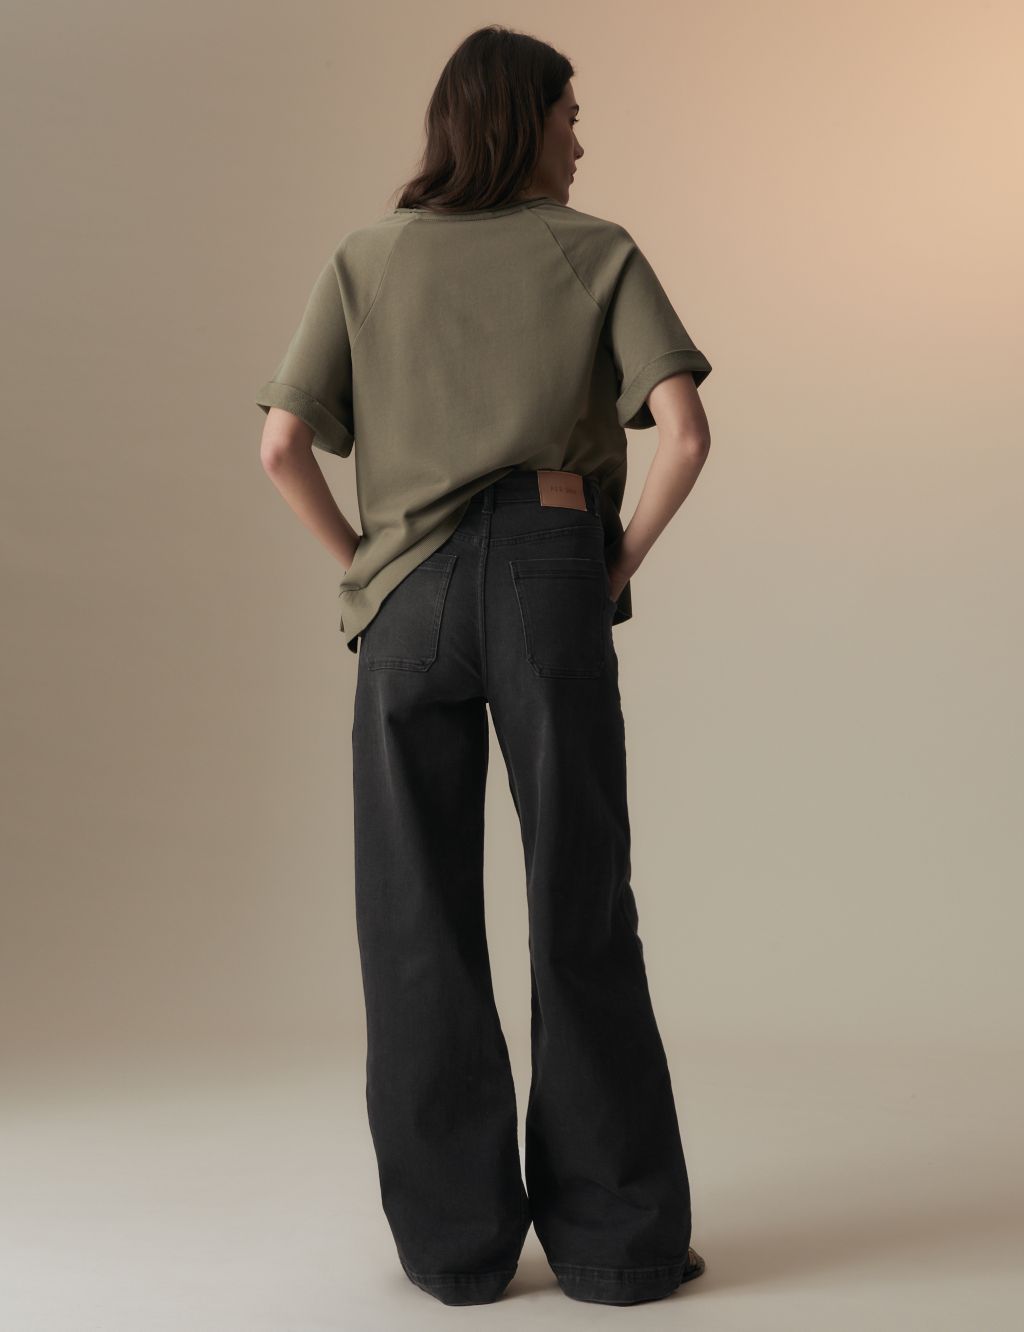 High Waisted Wide Leg Jeans image 3